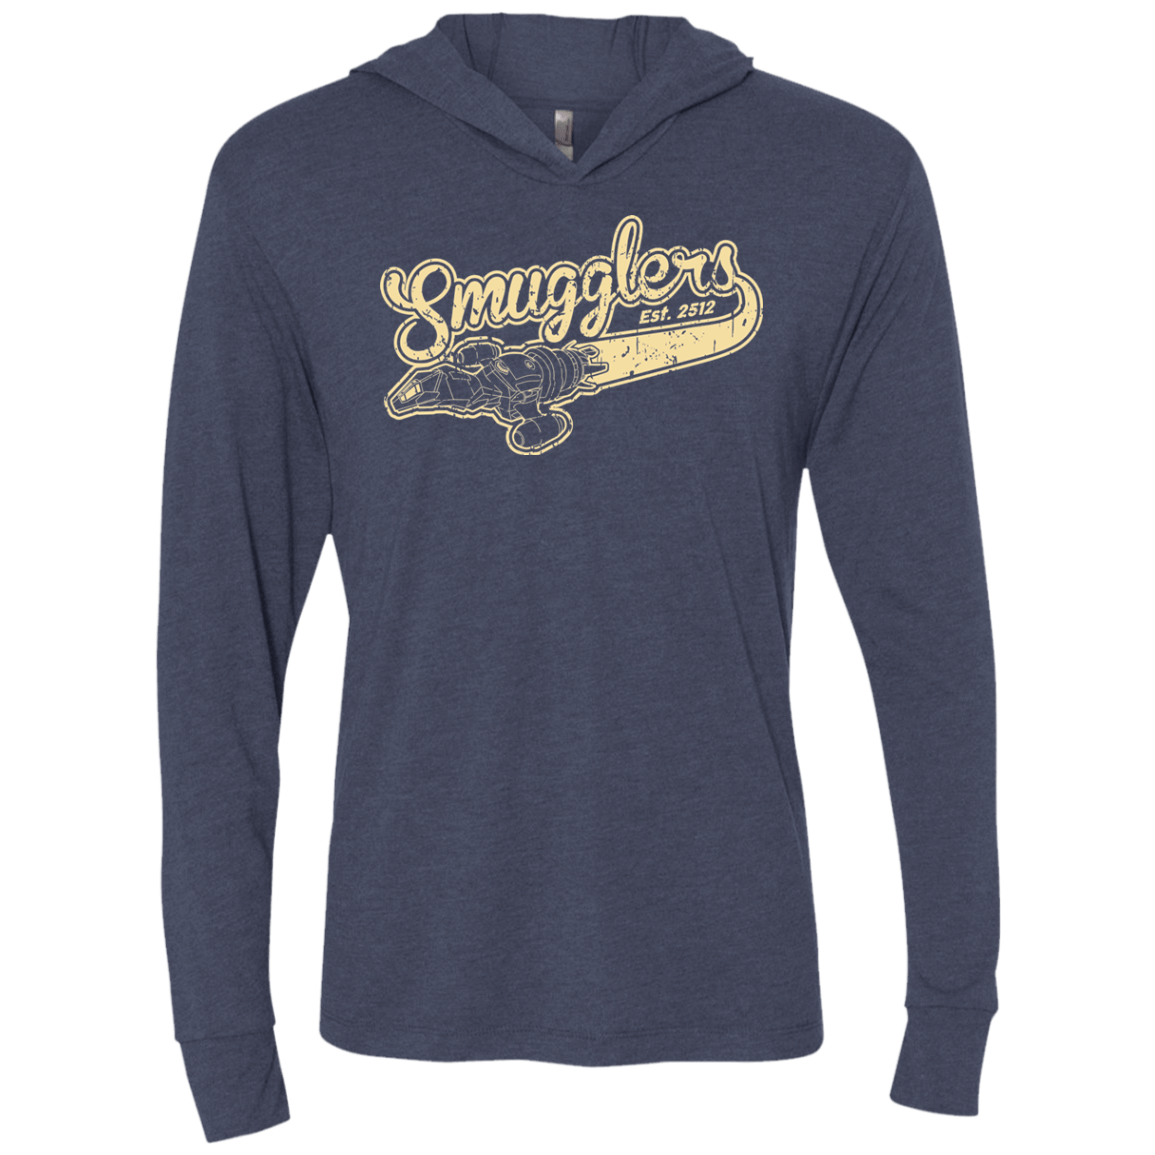 T-Shirts Vintage Navy / X-Small Smugglers Triblend Long Sleeve Hoodie Tee